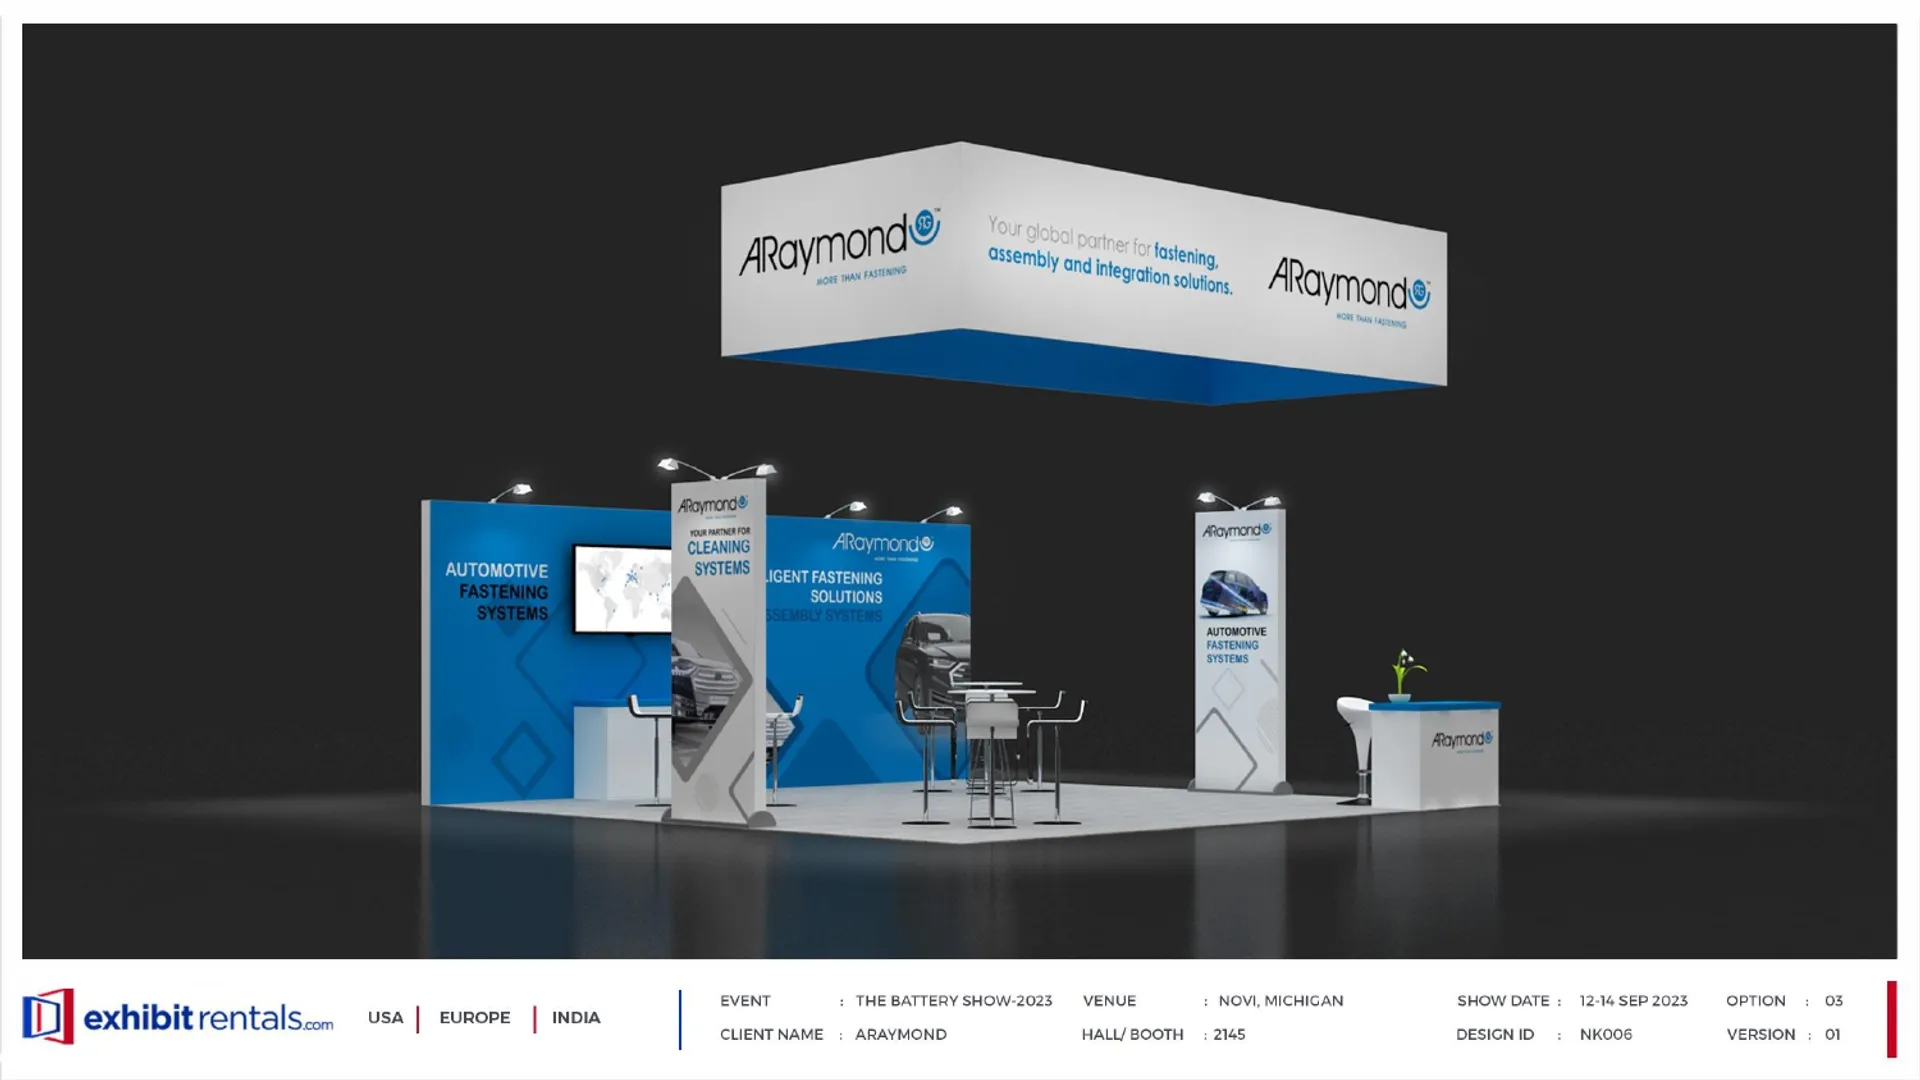 booth-design-projects/Exhibit-Rentals/2024-04-18-20x20-PENINSULA-Project-88/3.1_ARaymond_The Battery Show_ER Design presentation-13_page-0001-0vzcgs.jpg